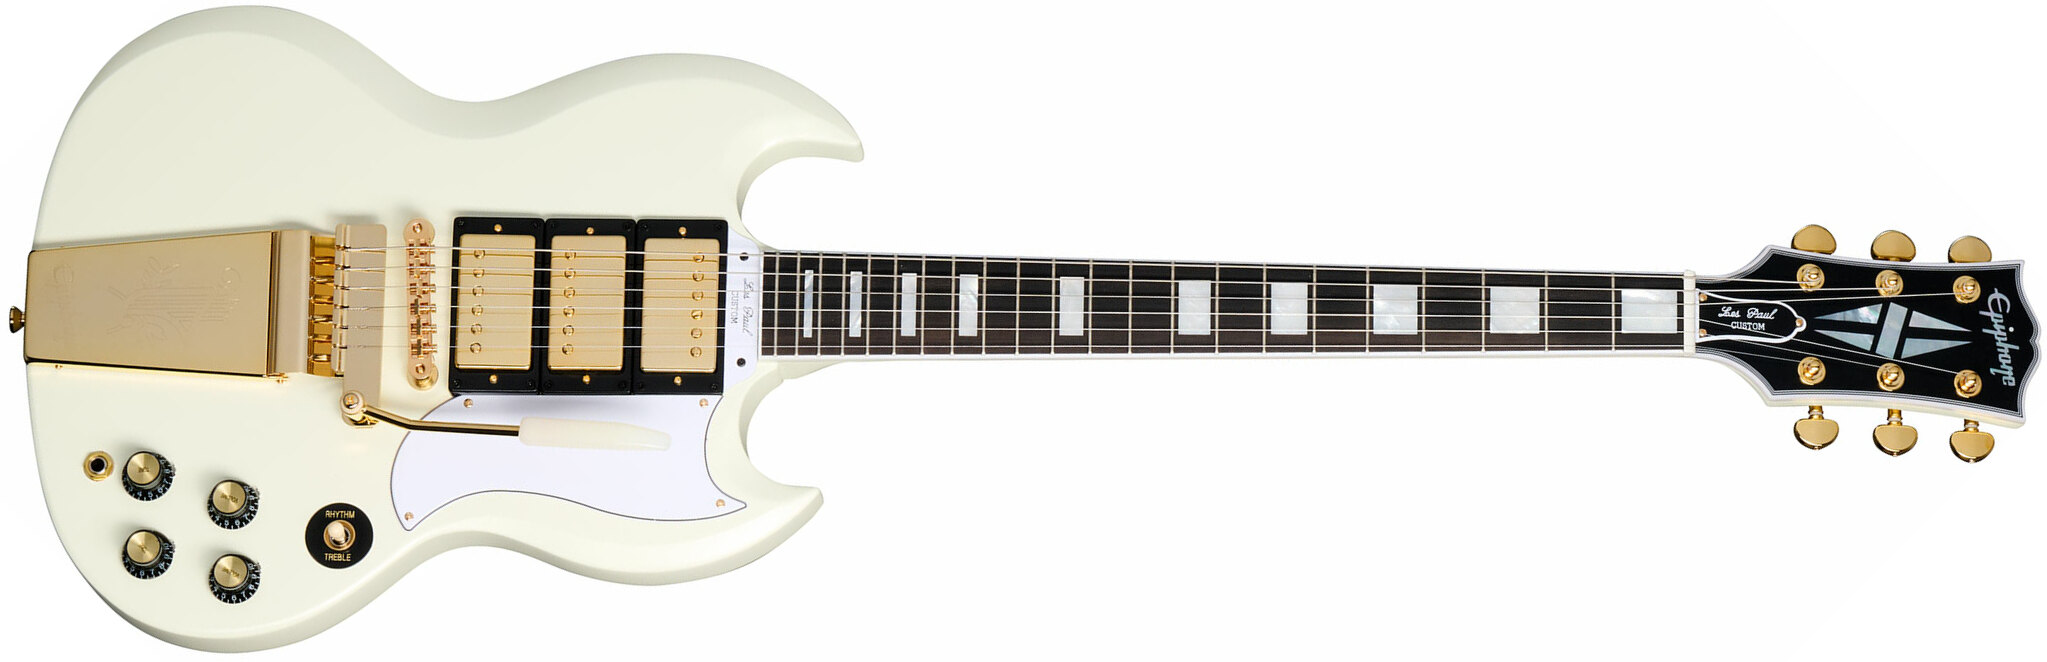 Epiphone Sg Les Paul Custom 1963 Maestro Vibrola Inspired By 2h Trem Eb - Vos Classic White - Double cut electric guitar - Main picture